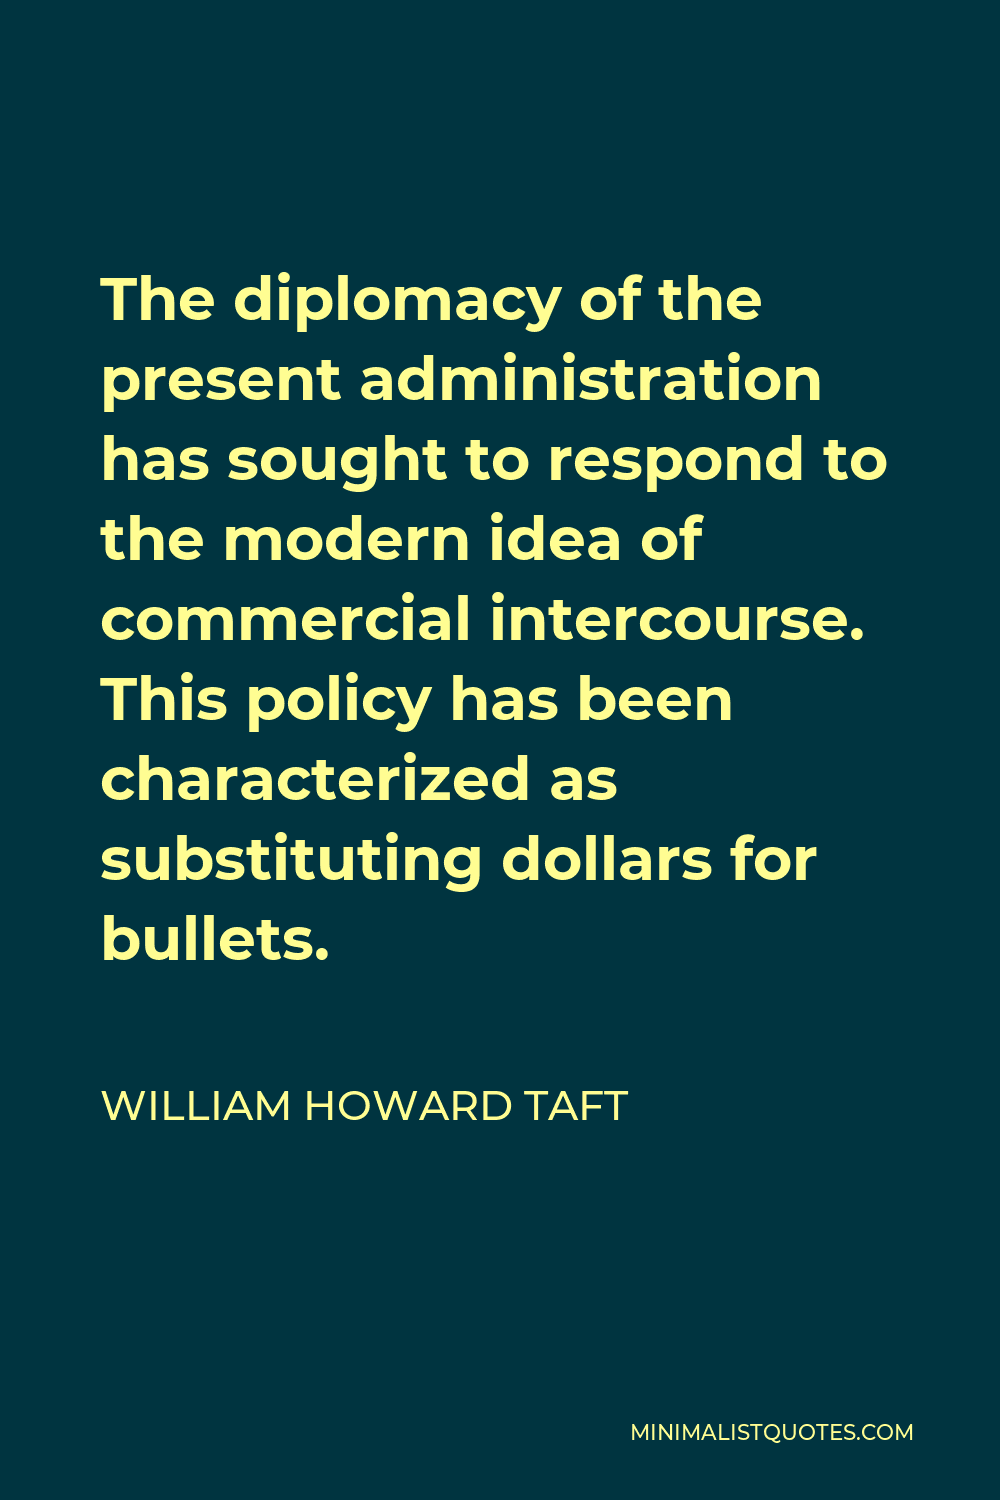 William Howard Taft Quote - The diplomacy of the present administration has sought to respond to the modern idea of commercial intercourse. This policy has been characterized as substituting dollars for bullets.